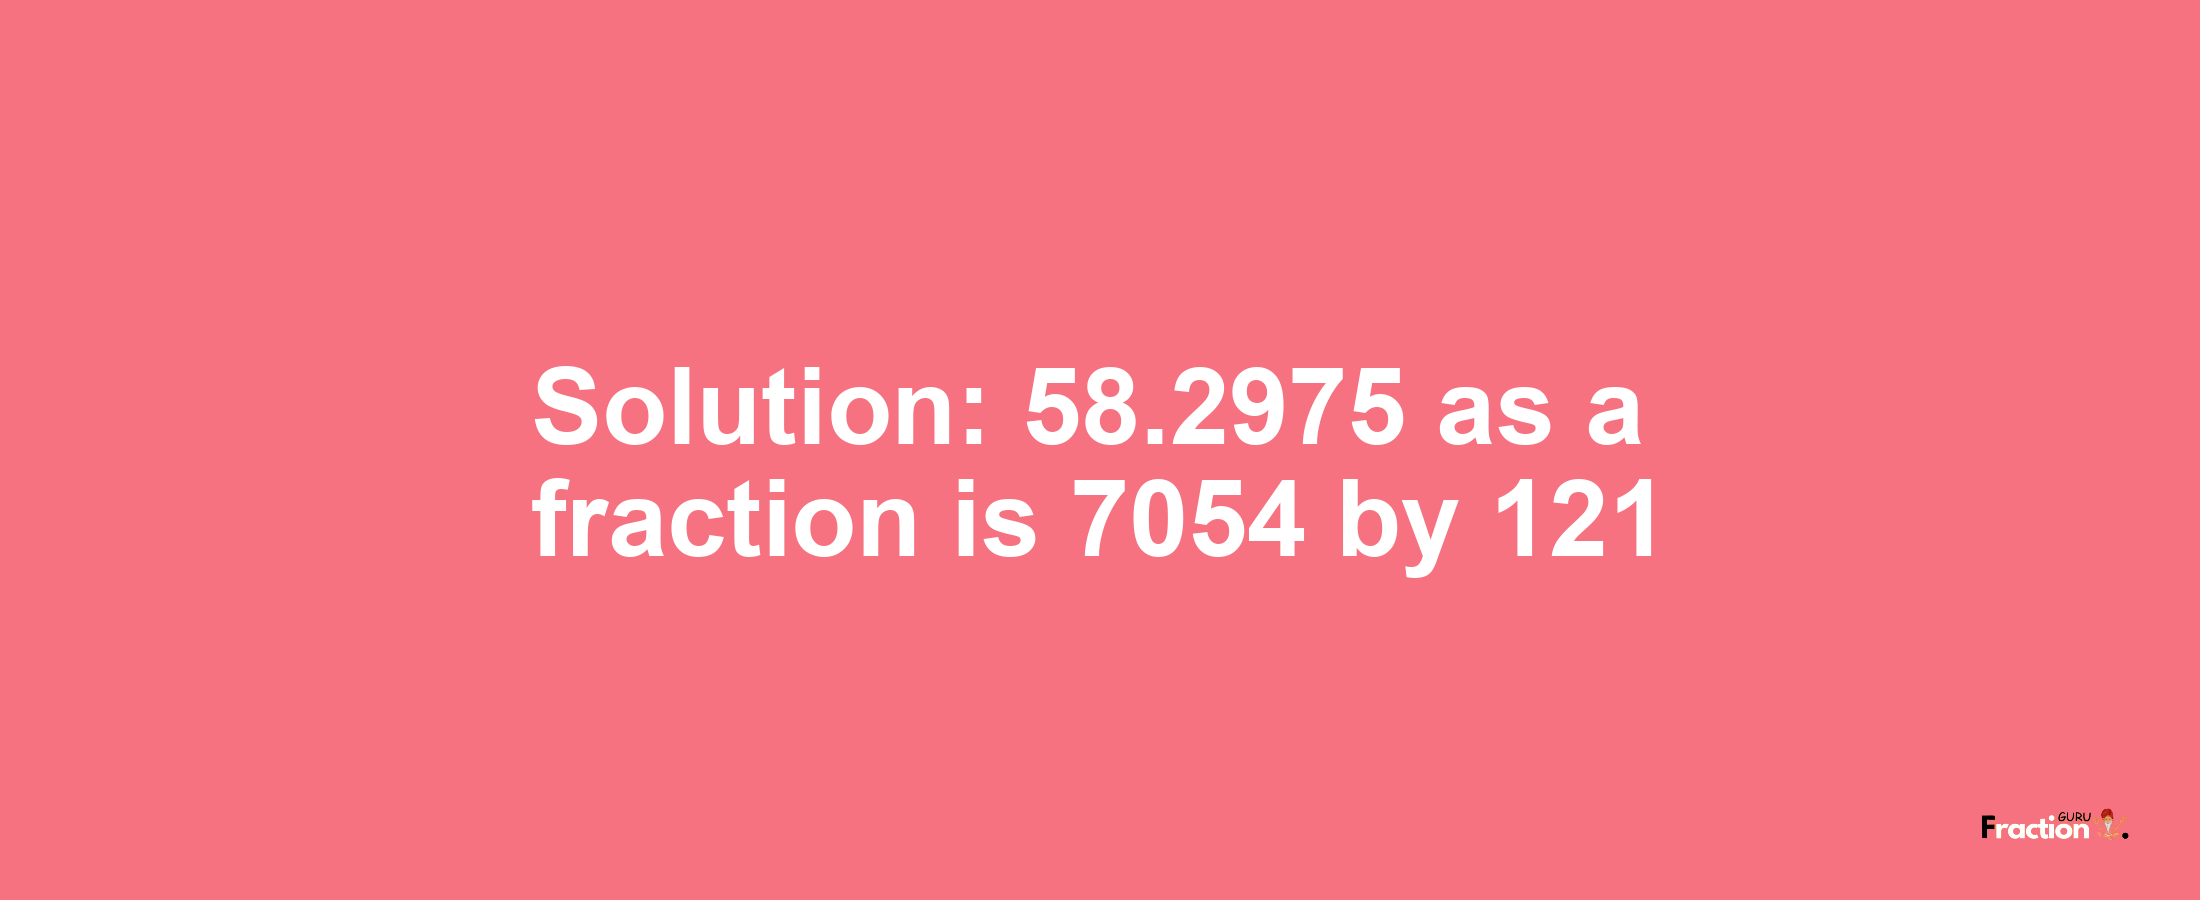 Solution:58.2975 as a fraction is 7054/121